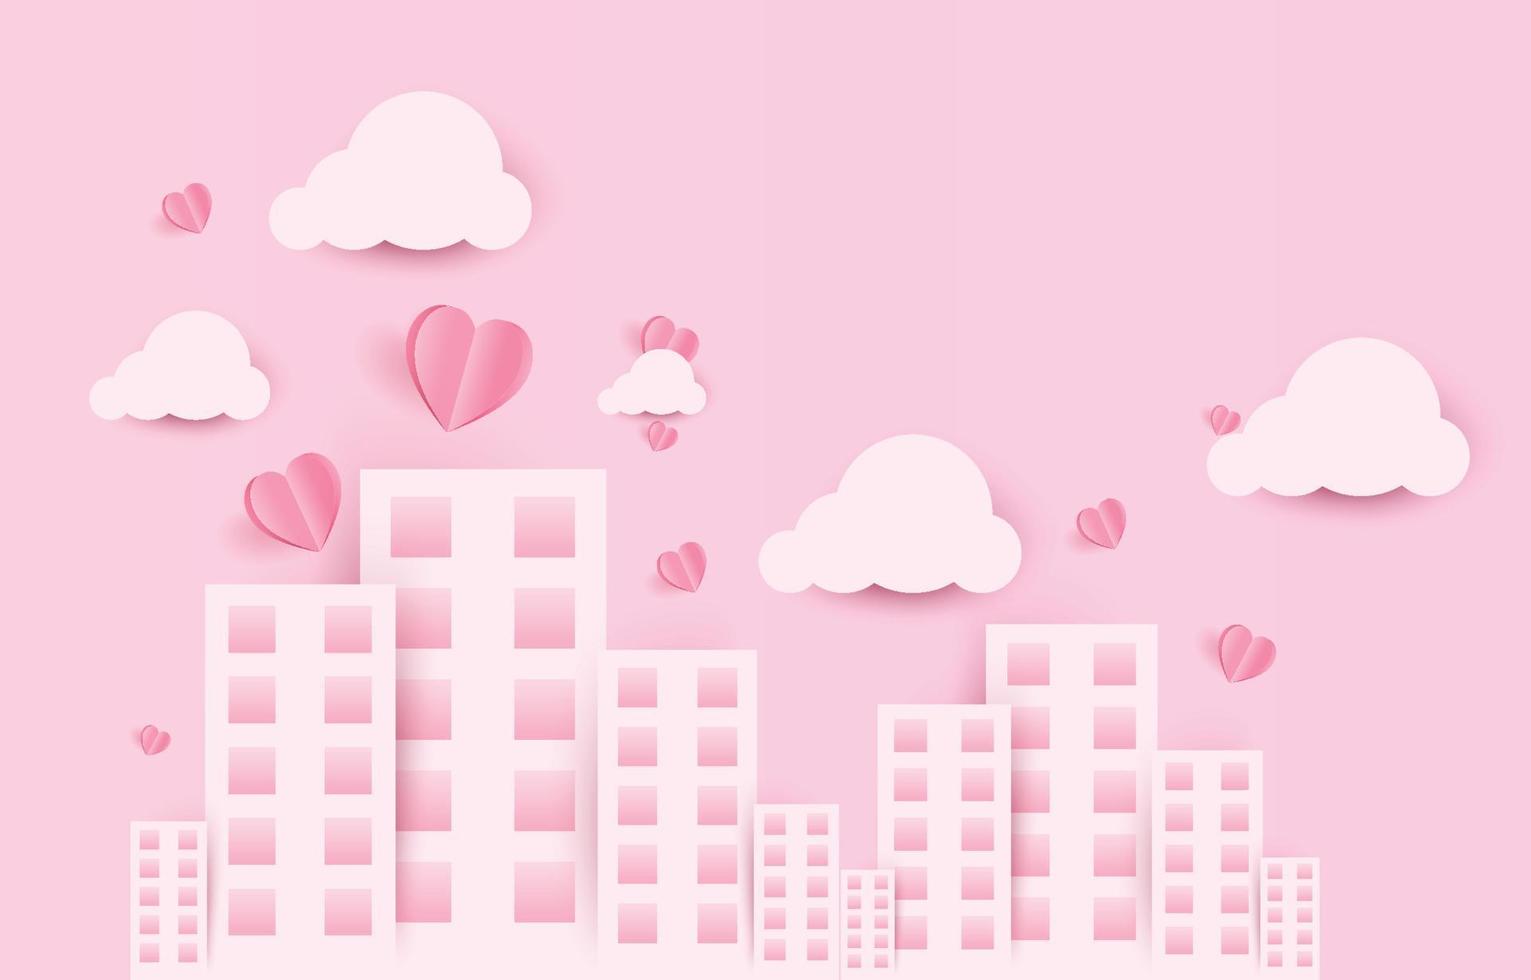 Paper cut elements in shape of heart flying with clouds and city on pink and sweet background. Vector symbols of love for Happy Valentine's Day, birthday greeting card design.